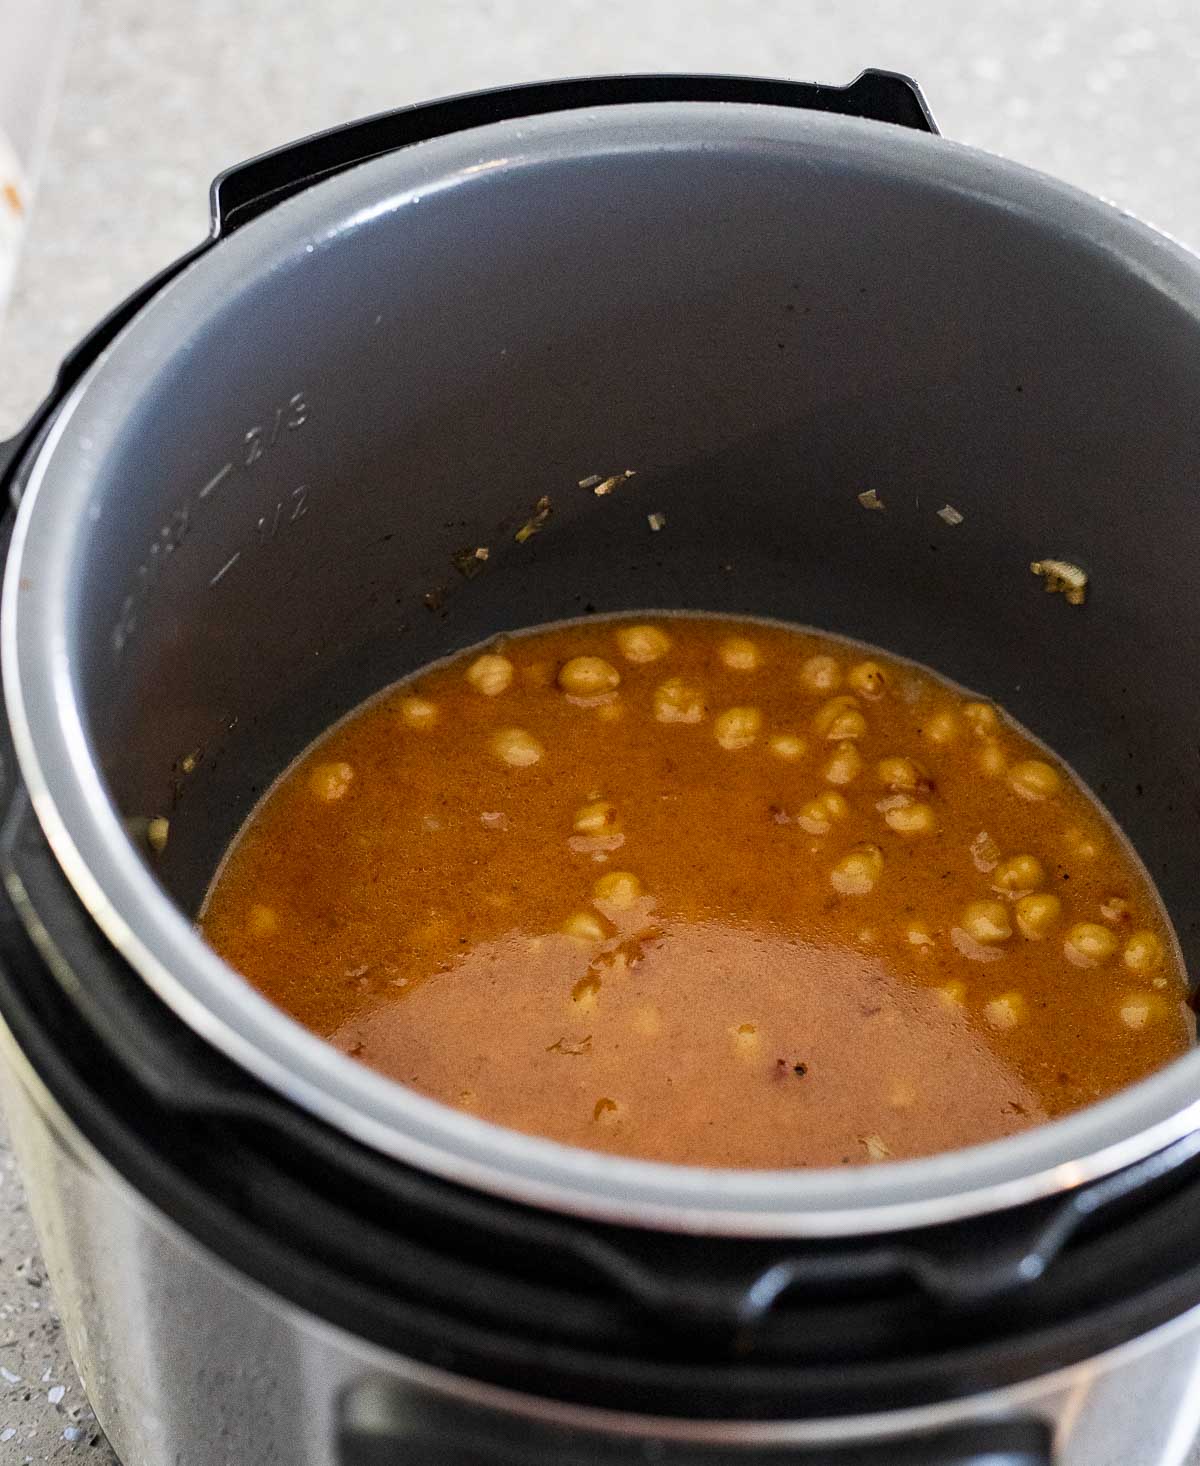 Broth, coconut milk, chickpeas and other ingredients in the Instant Pot.